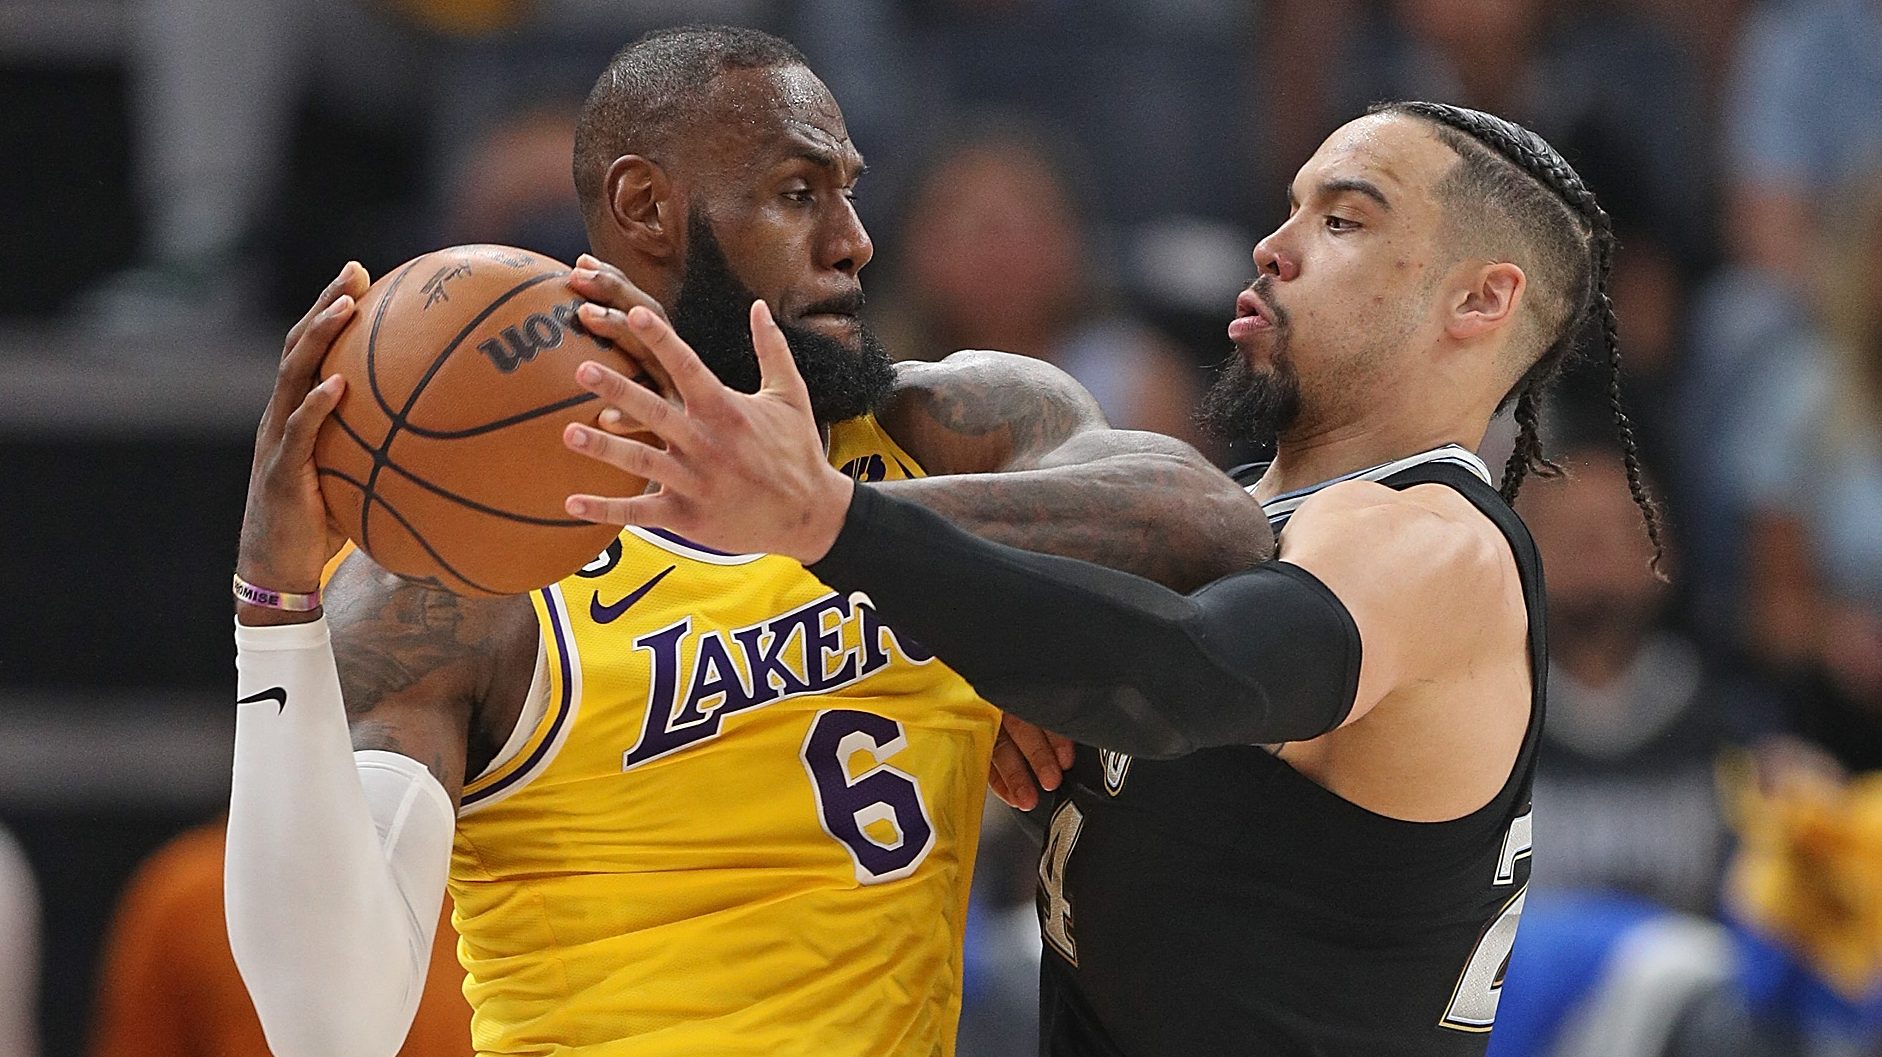 LeBron James is tired of waiting for Lakers moves: What our walk